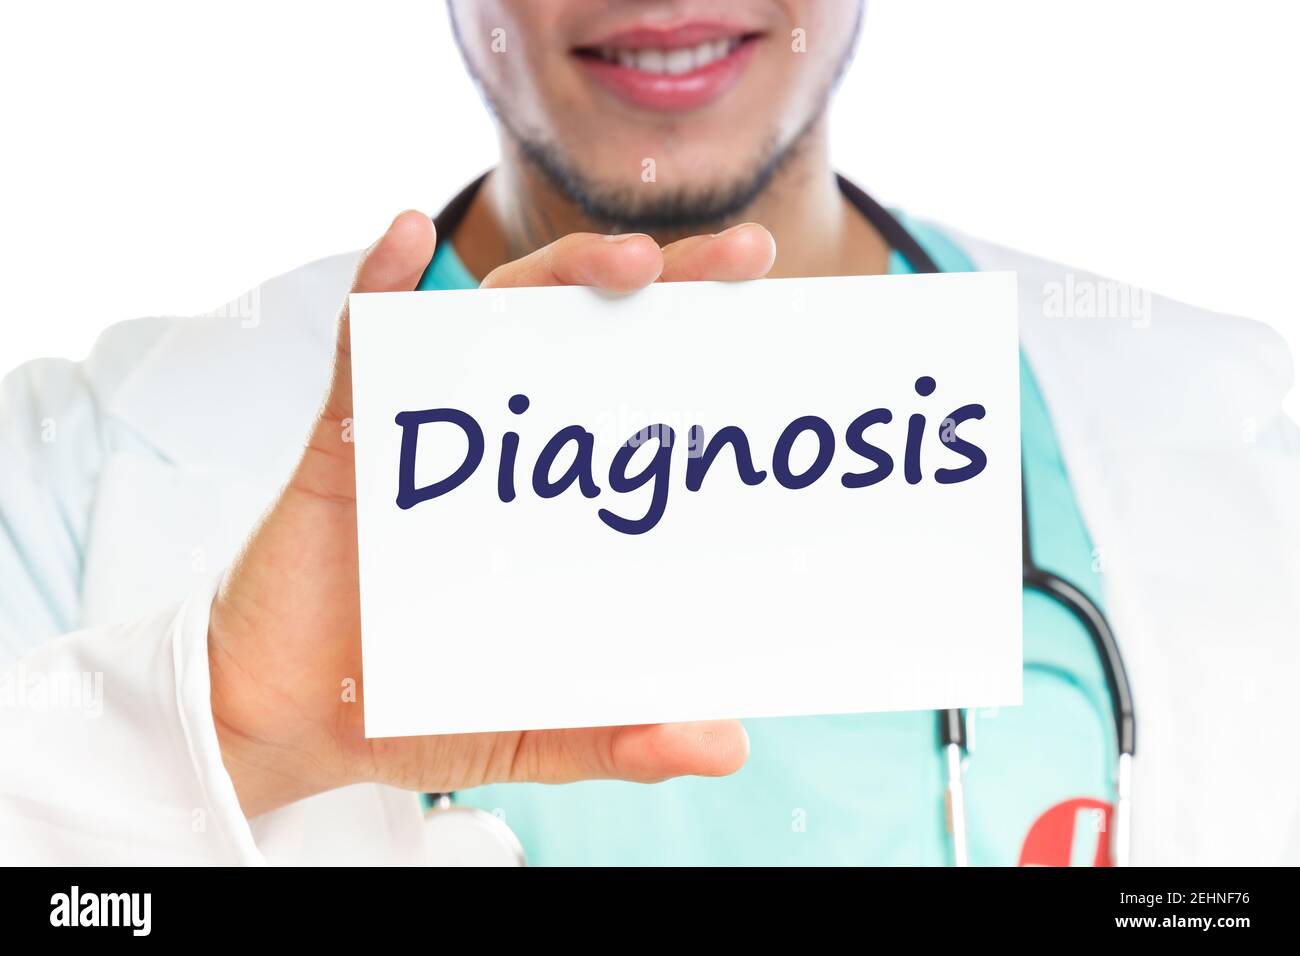 Diagnosis disease ill illness healthy health check-up screening doctor with sign Stock Photo